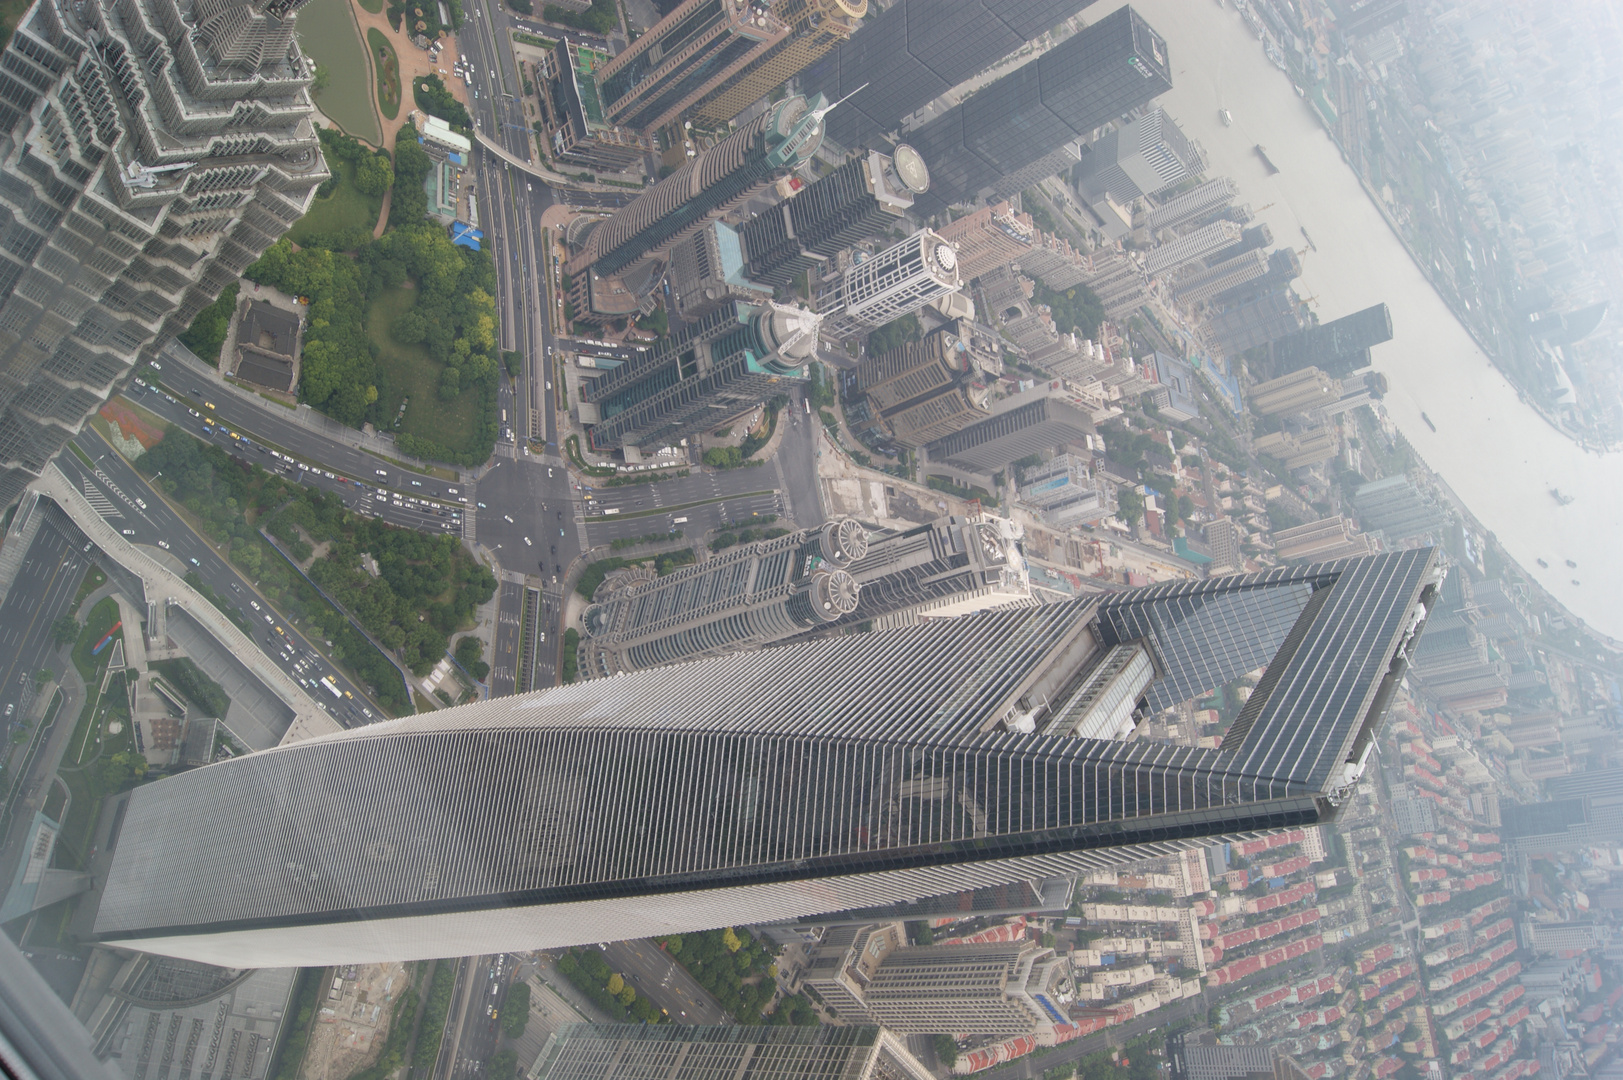 View from Shanghai Tower